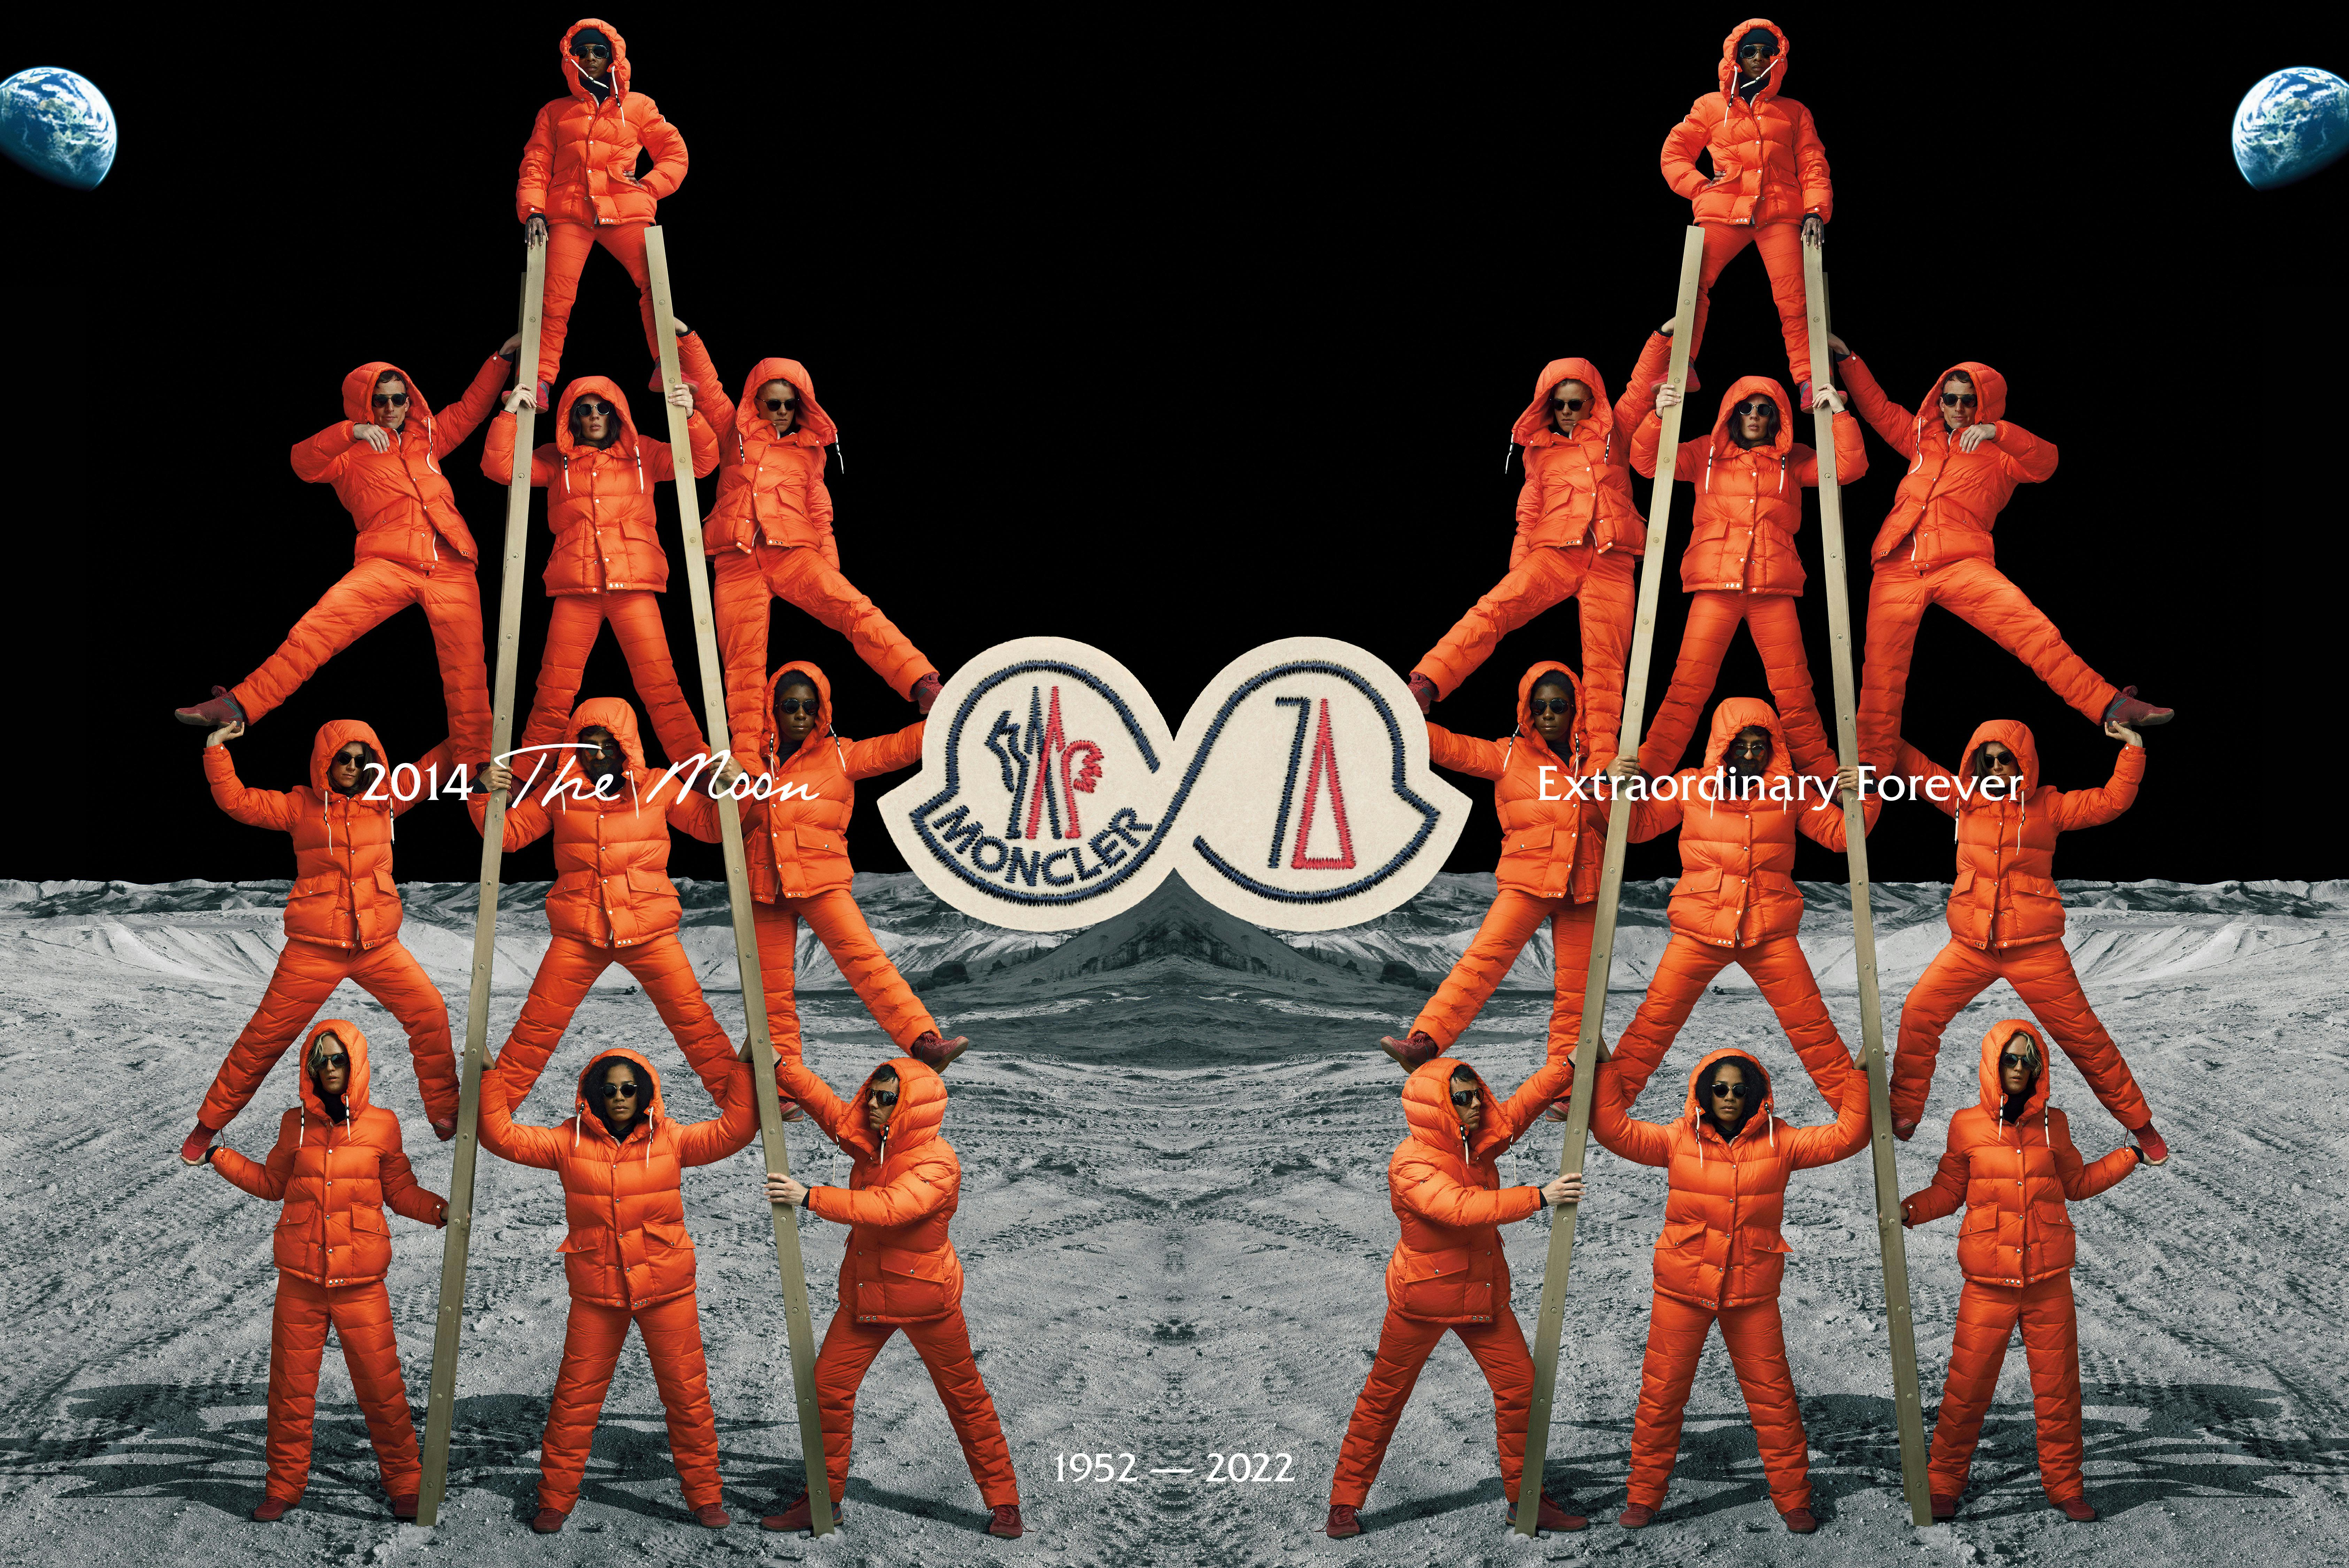 Moncler Campaign: The Expedition